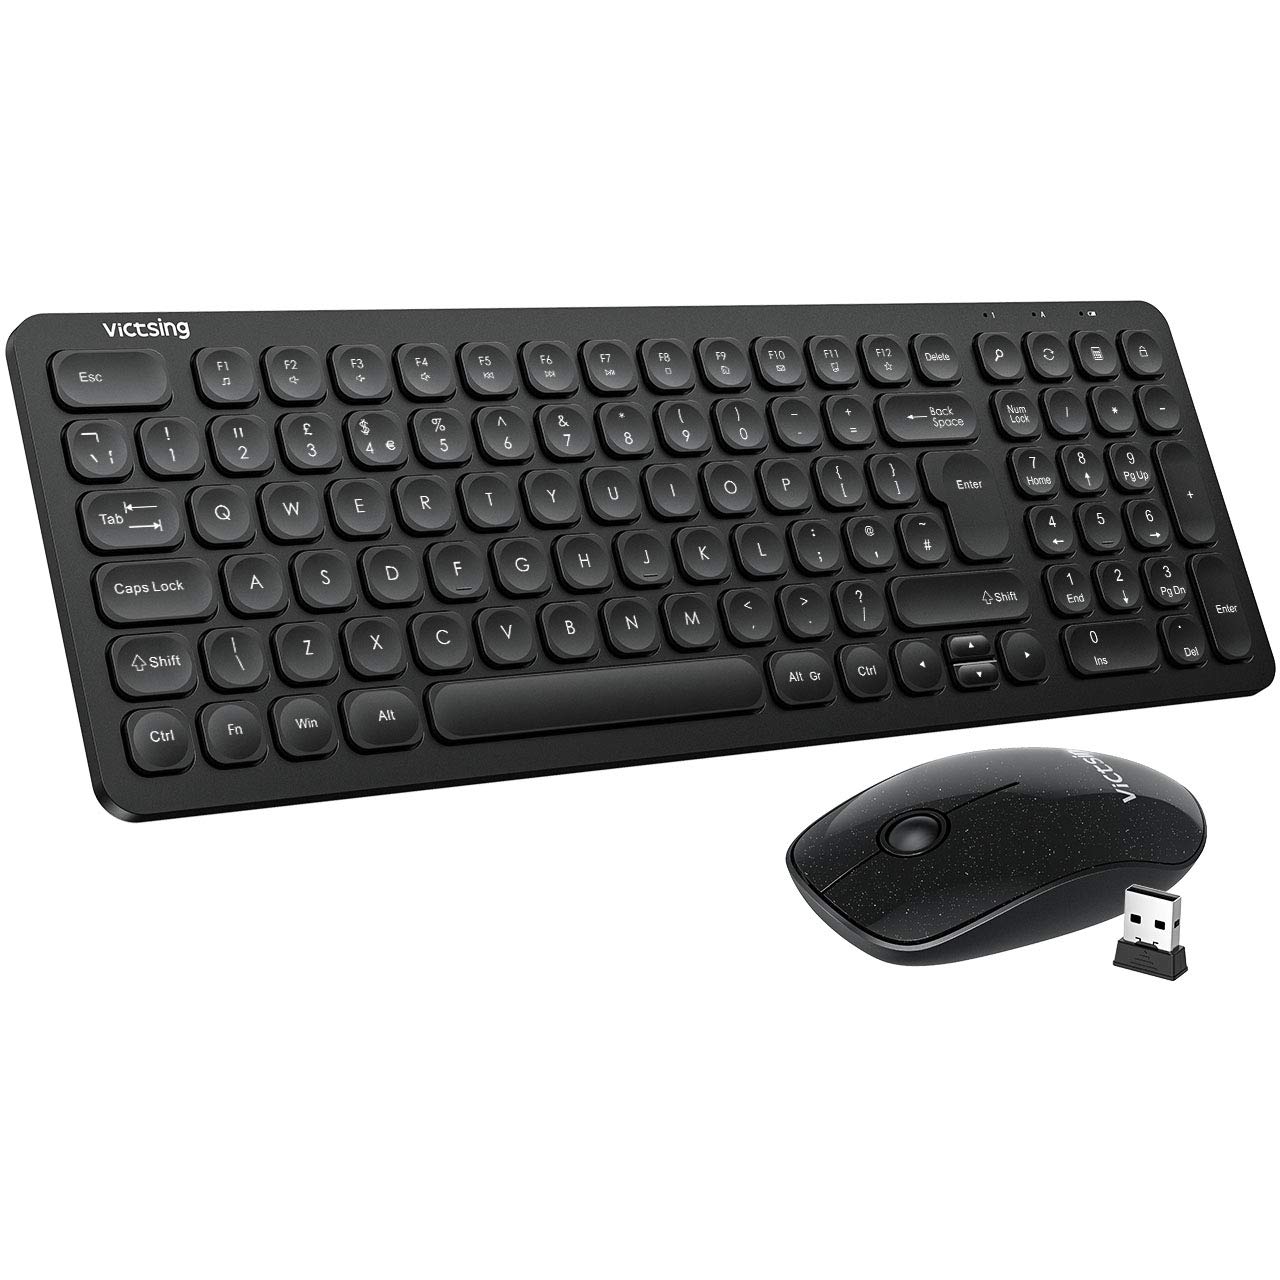 Victsing Wireless Keyboard and Mouse Combo, 2.4G Ultra Slim Keyboard and Mouse Set, 98% Noise Reduction, Energy-saving, 4 Separate Multimedia Keys, for PC Laptop Mac iMac Windows